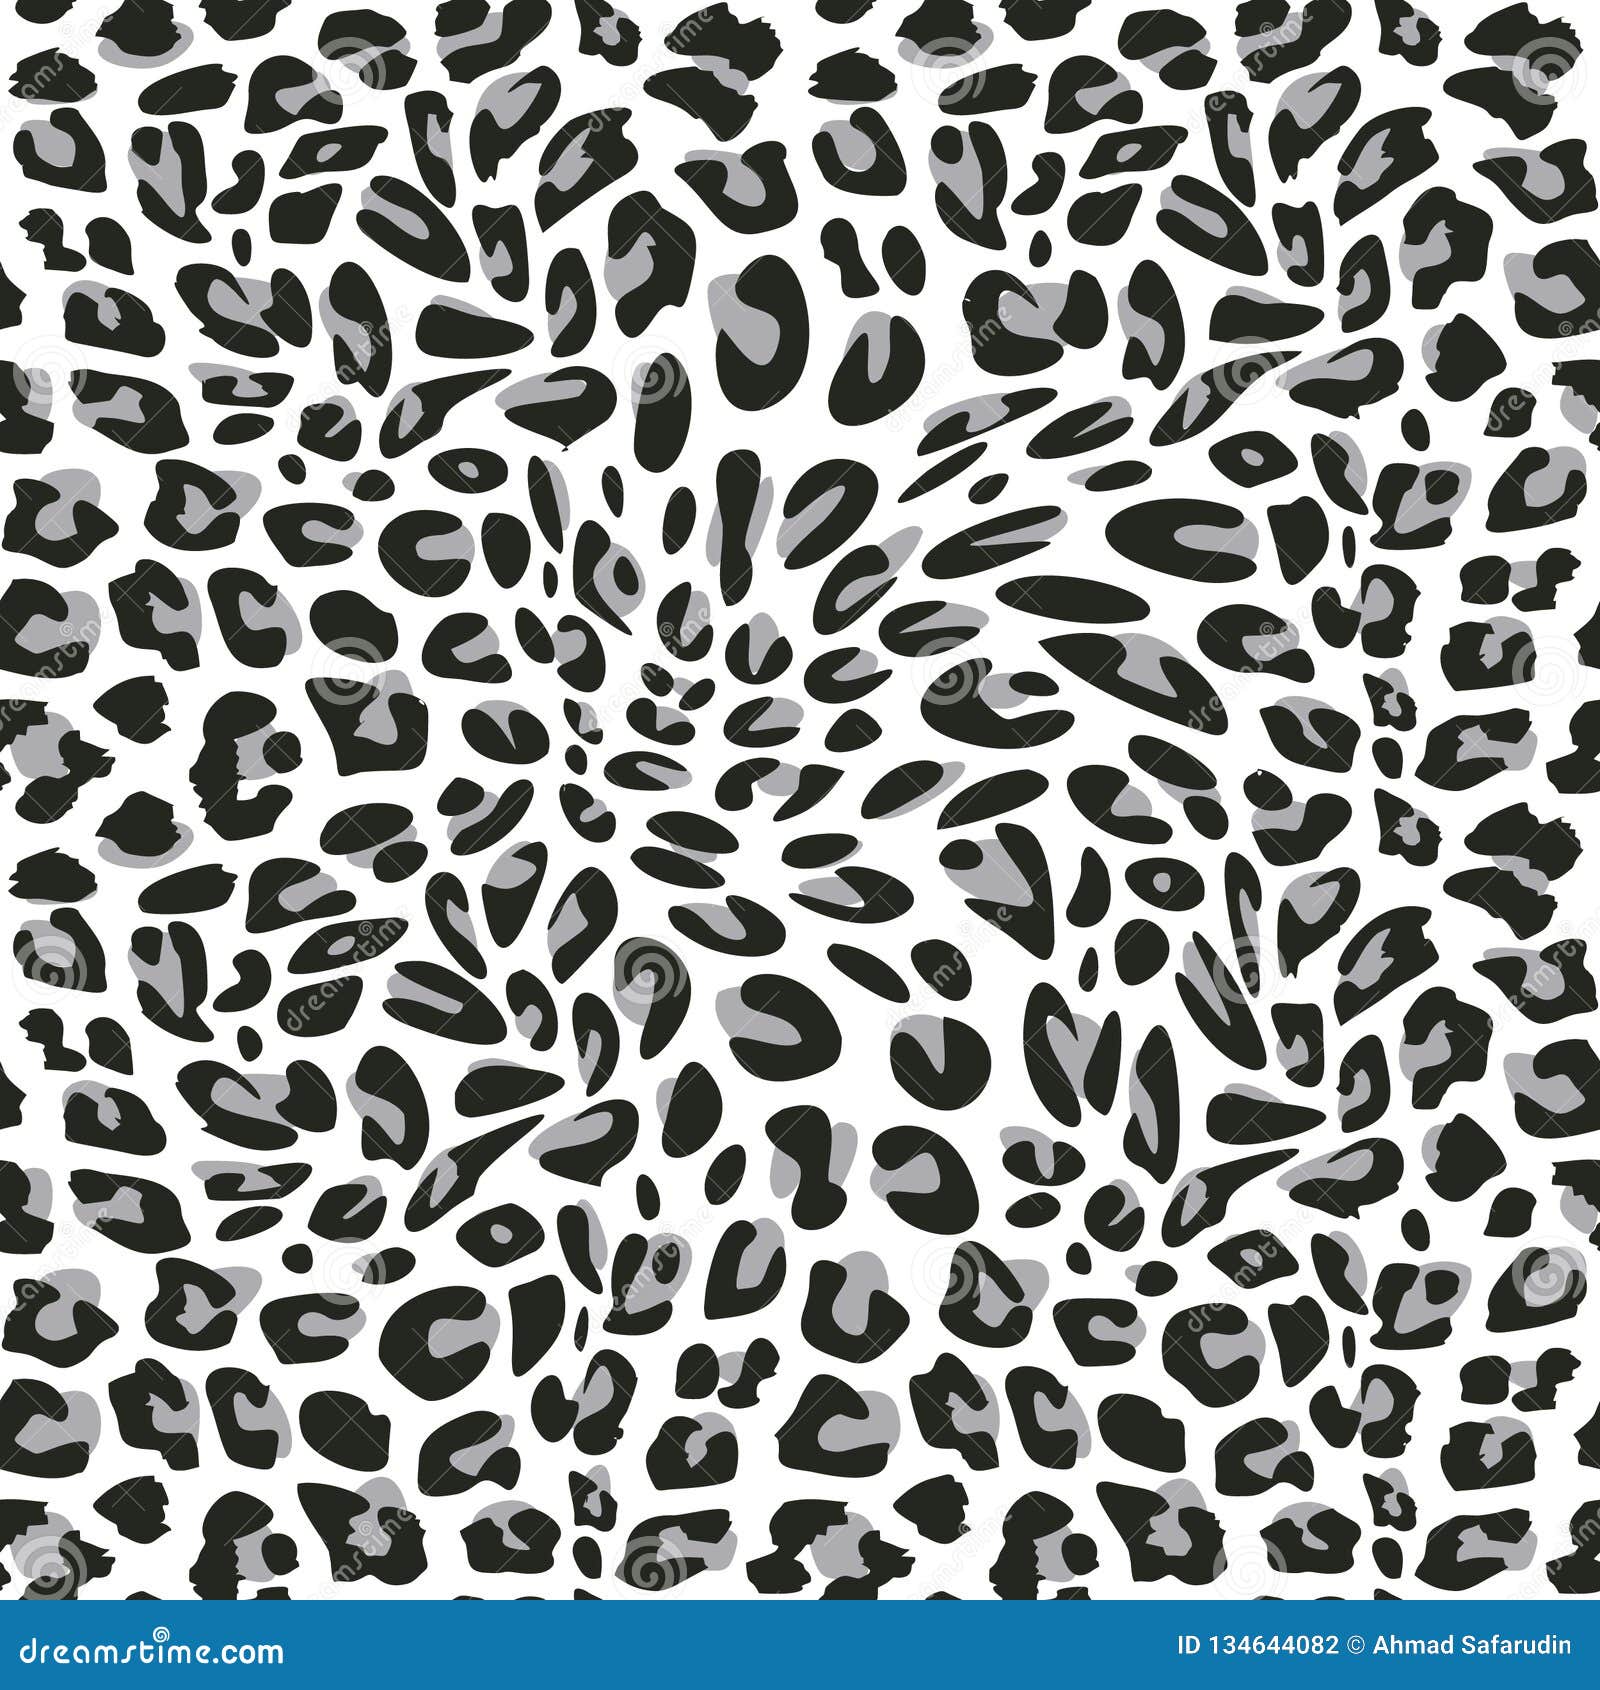 Leopard Seamless Pattern of Animal Skin in Black and White Stock Vector ...